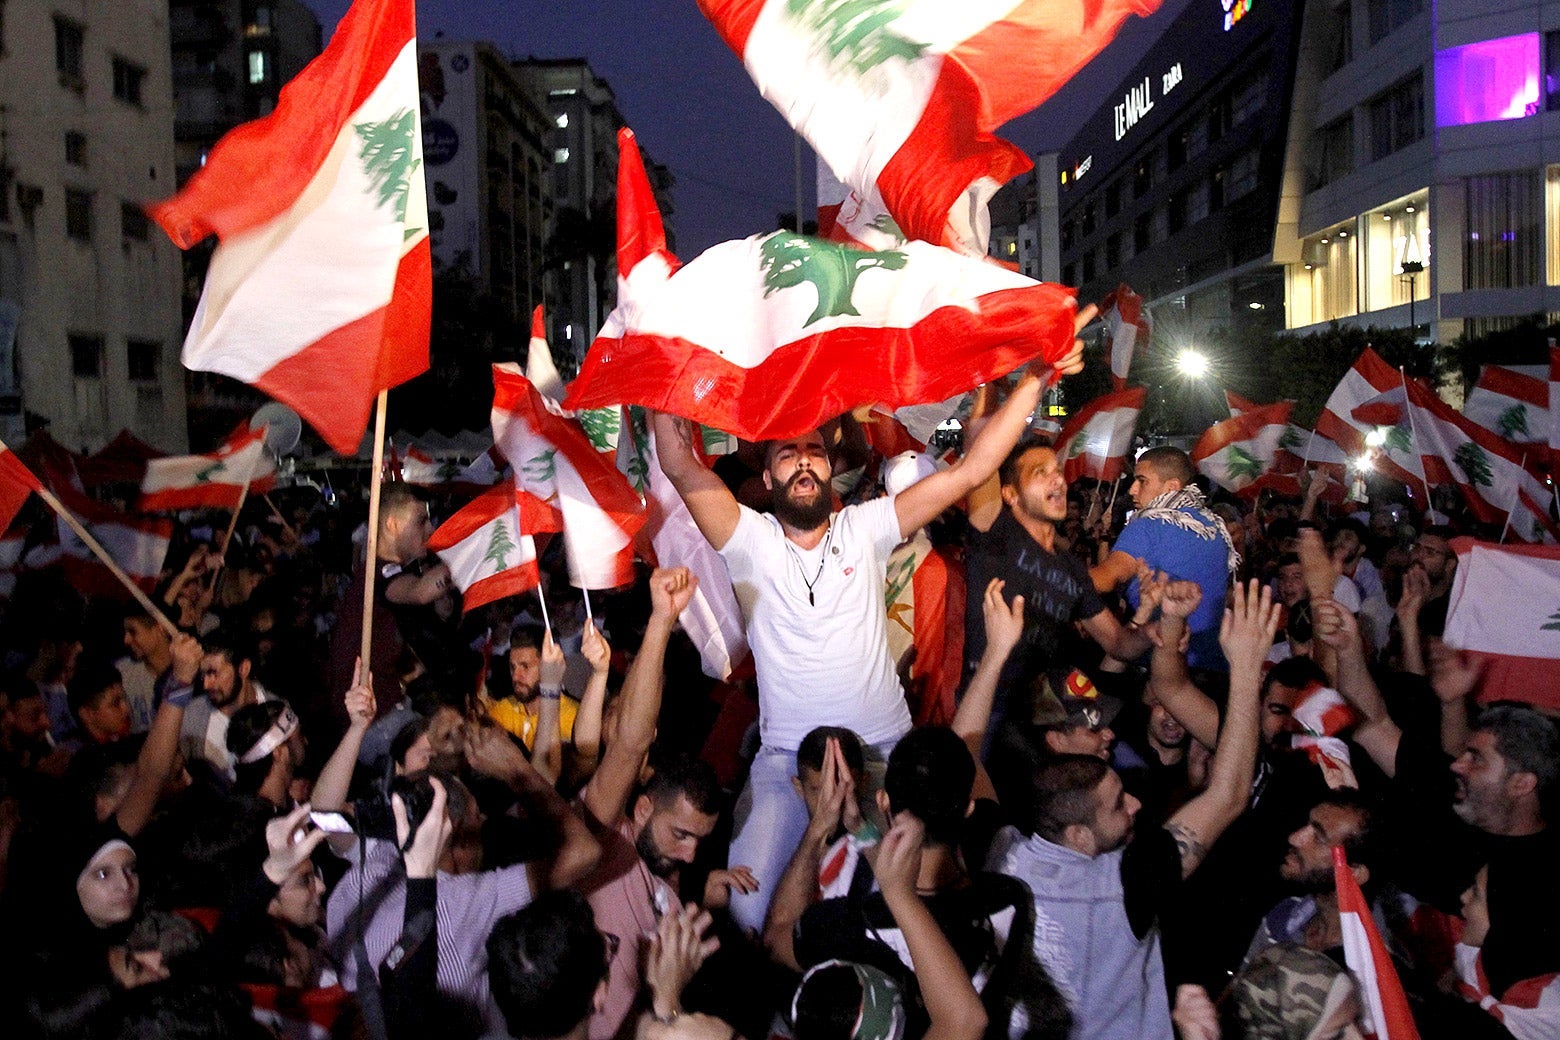 Lebanese protesters gather in Sidon on Monday. They are holding flags and chanting.